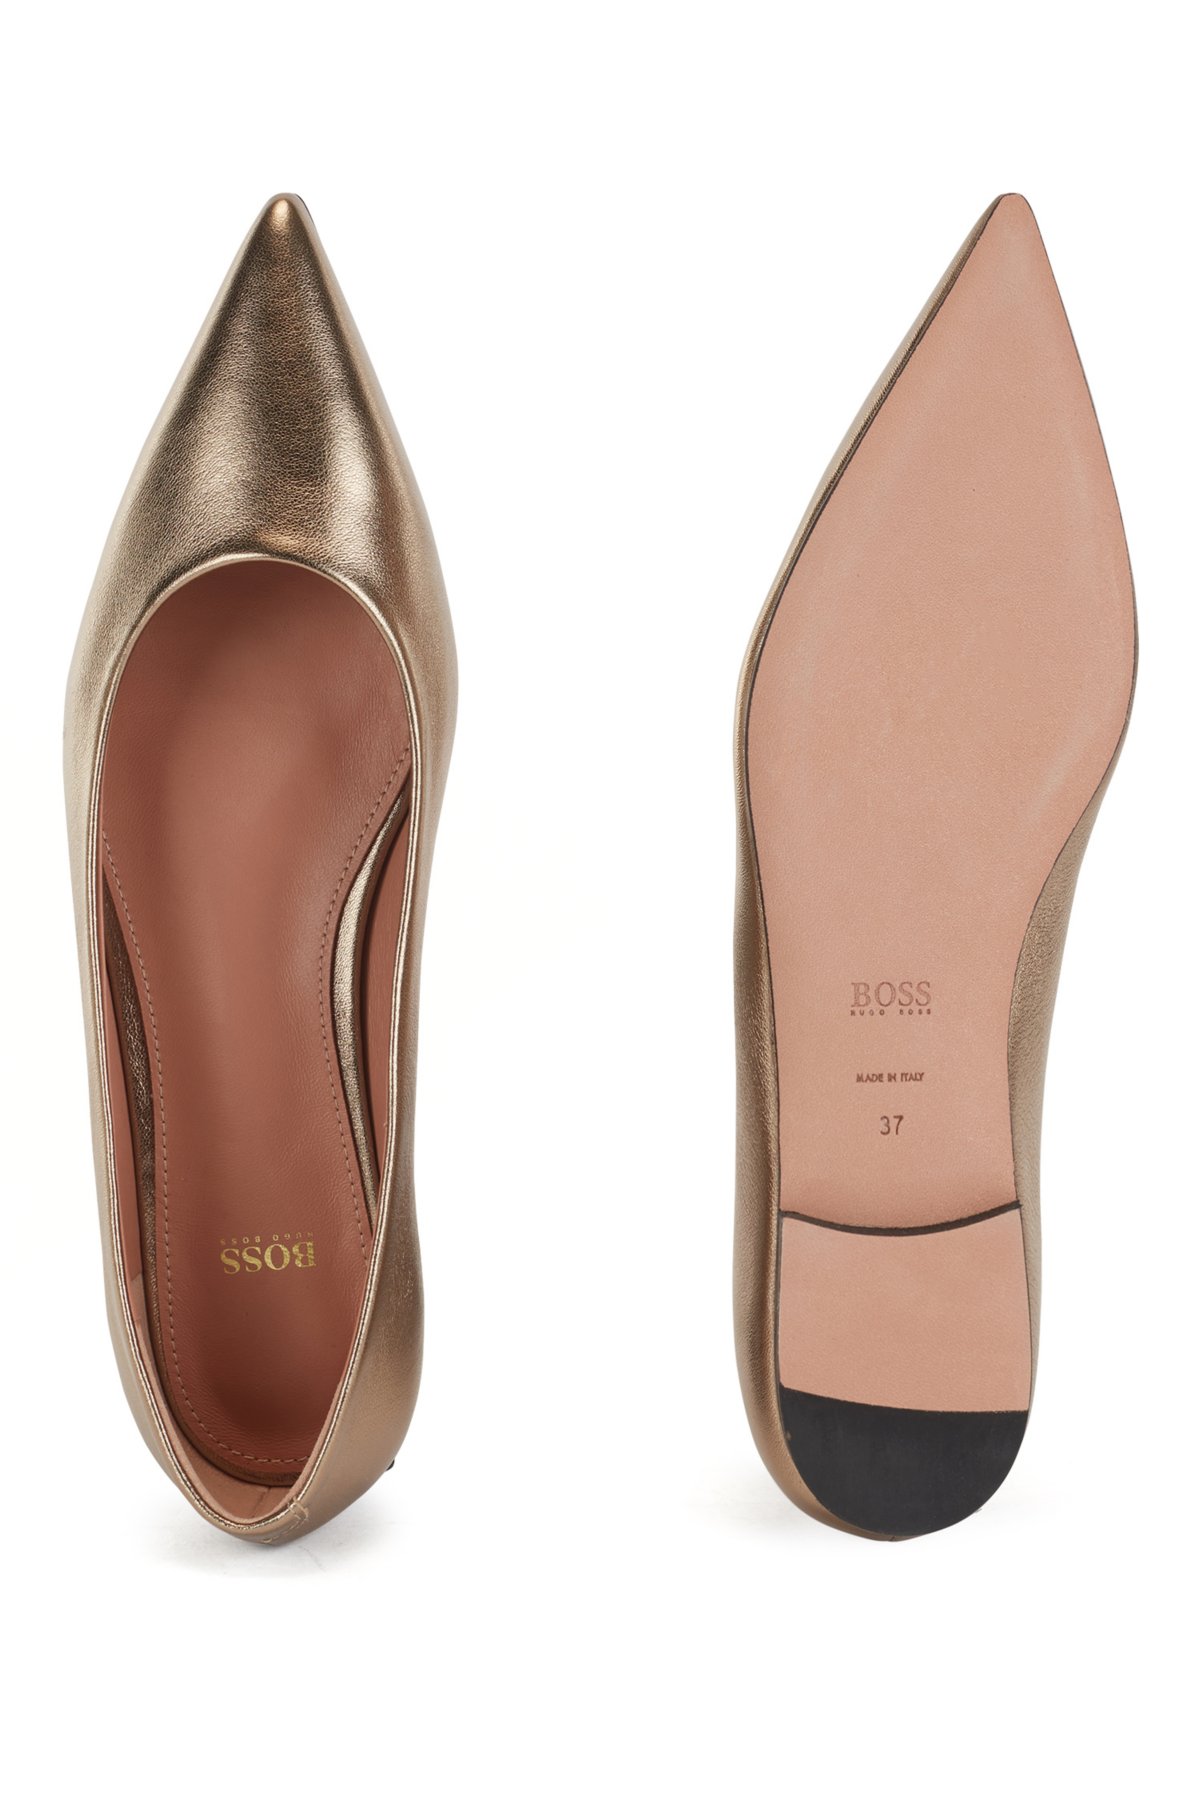 BOSS - pumps with pointed toe